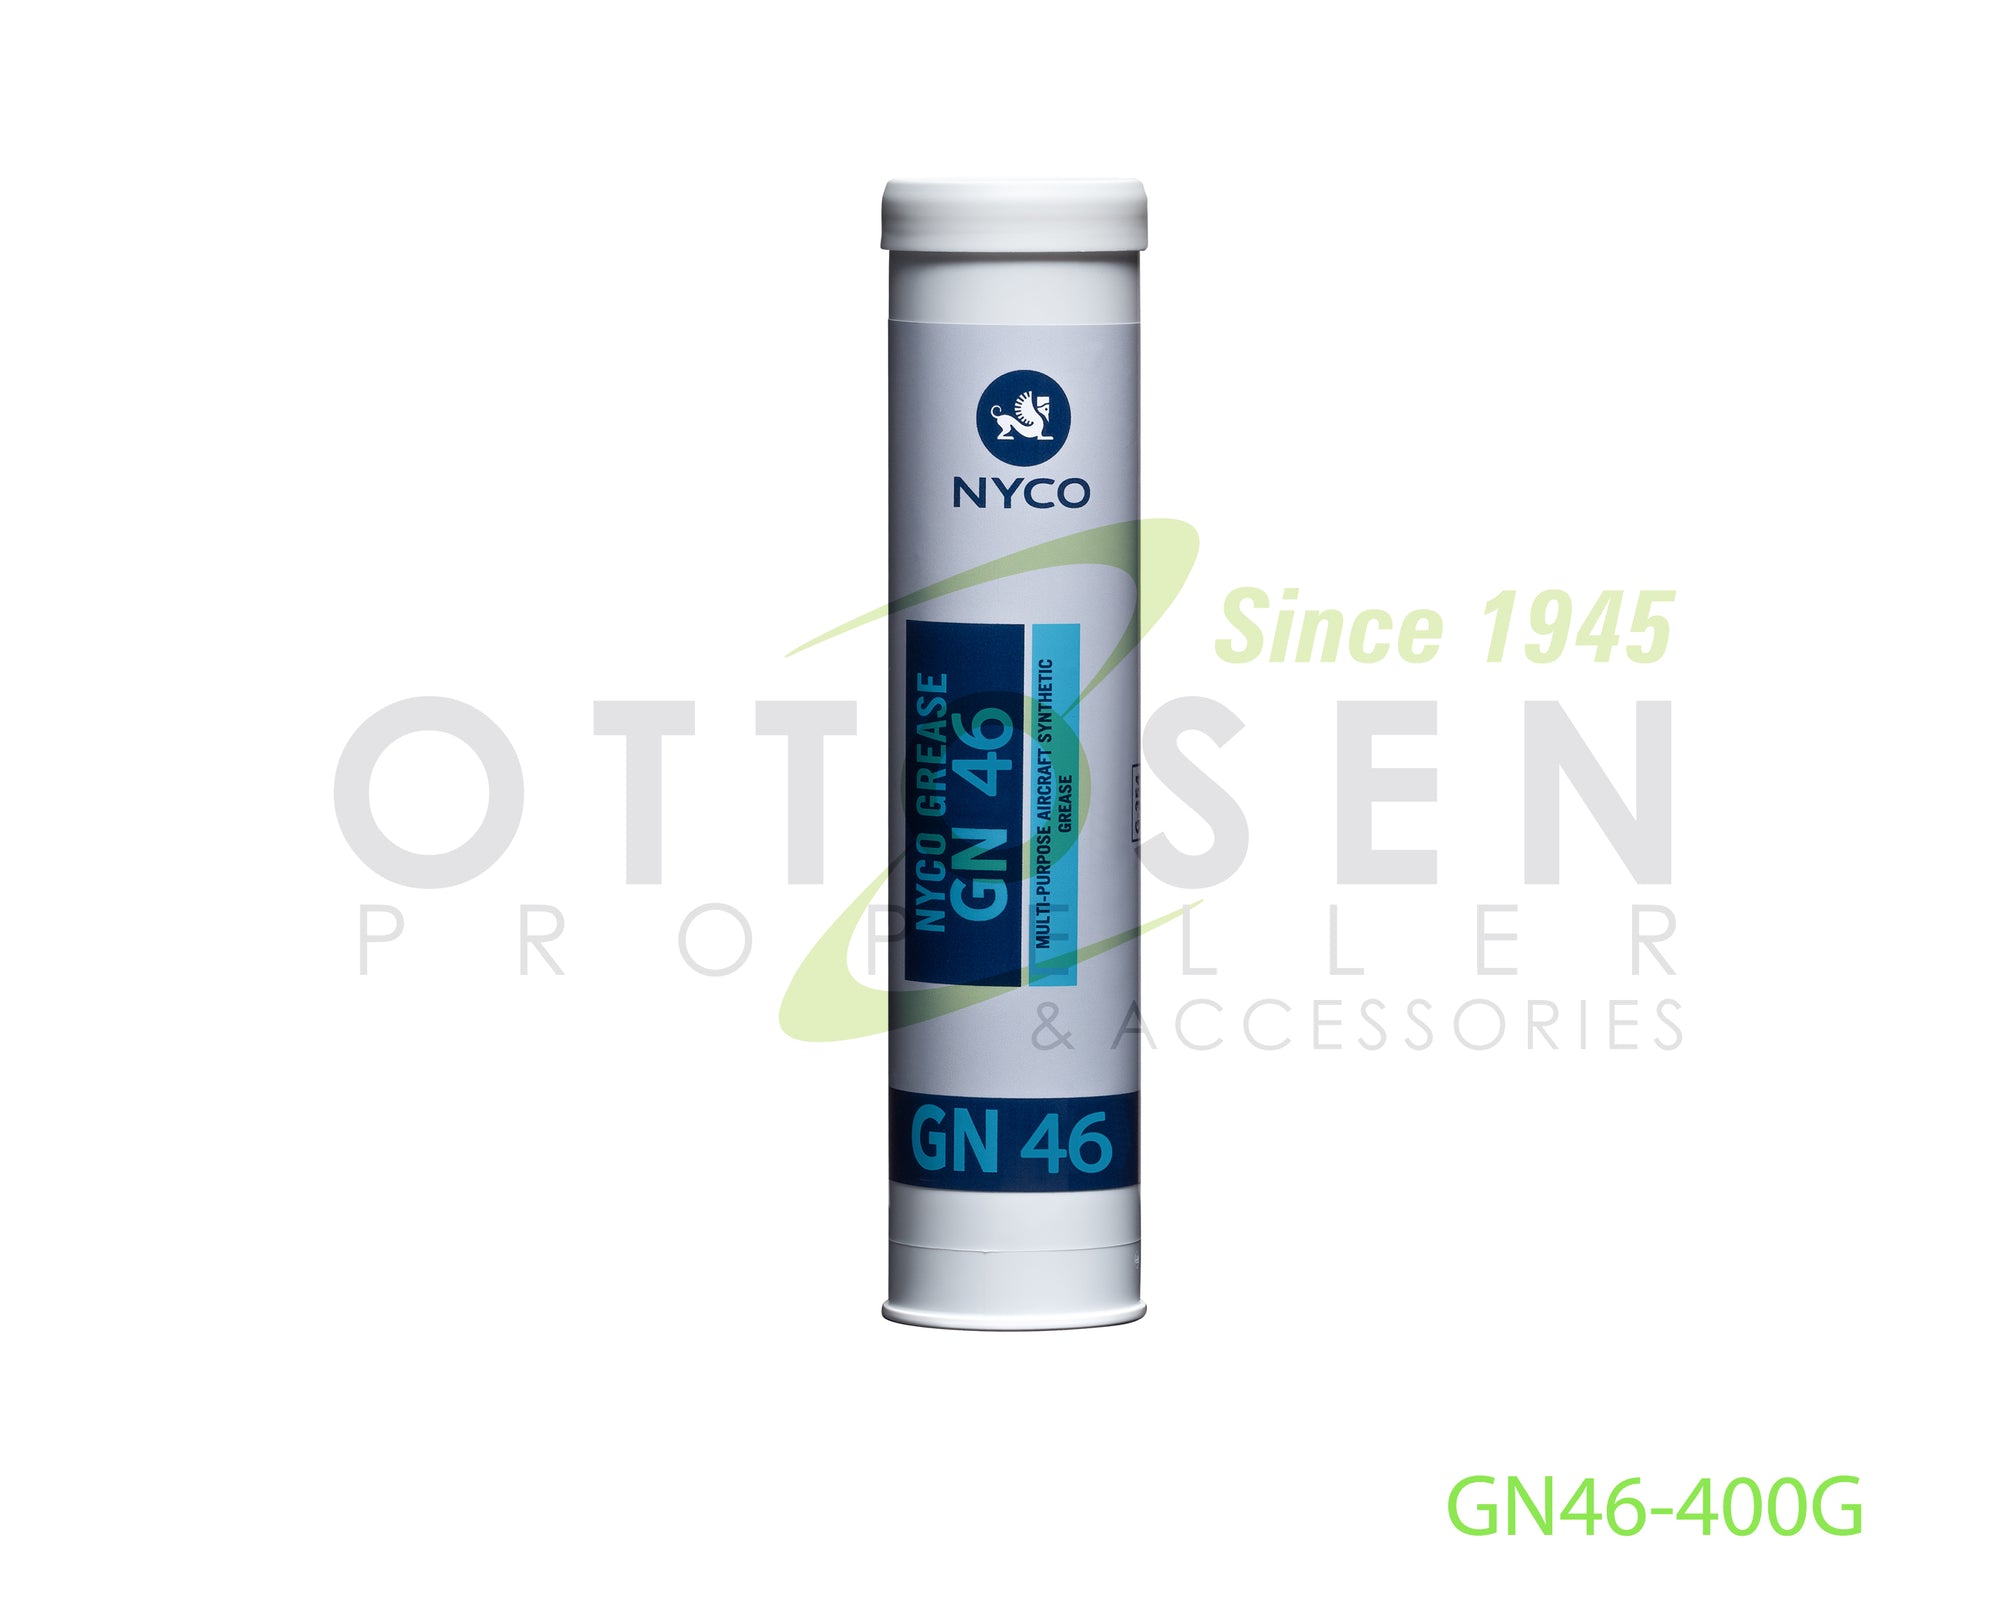 GN46-400G-NYCO-GREASE-PICTURE-1